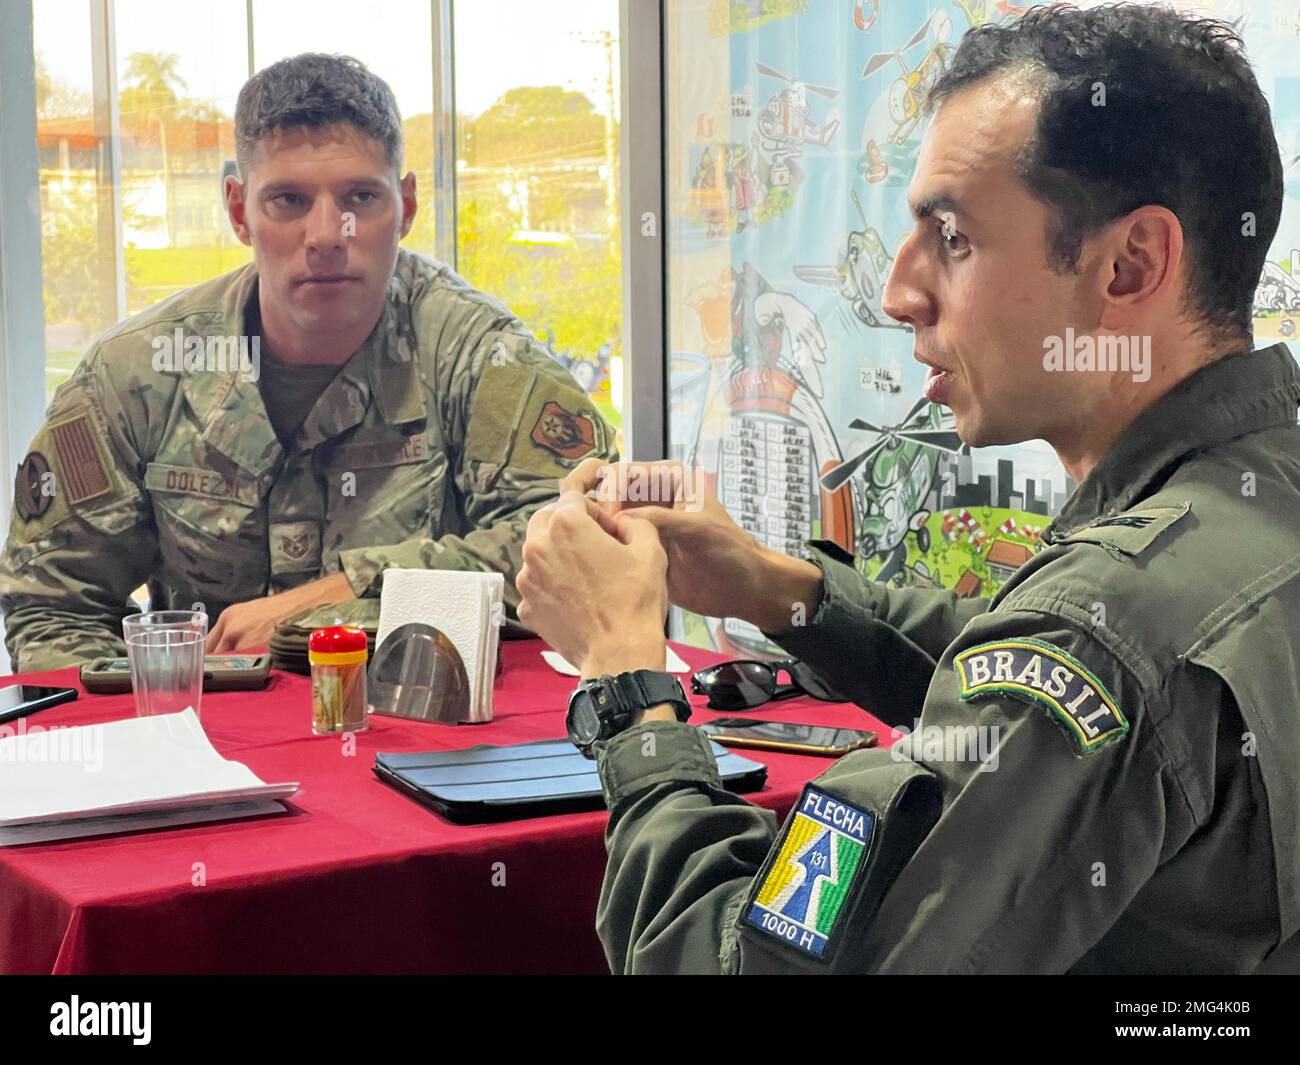 Capt. Diego Marques, an A-29 Super Tucano pilot with the Brazilian Air  Force discusses plans with TAir Force Tech. Sgt. Jeff Dolzel a member of  the 121 Special Tactics Squadron of the